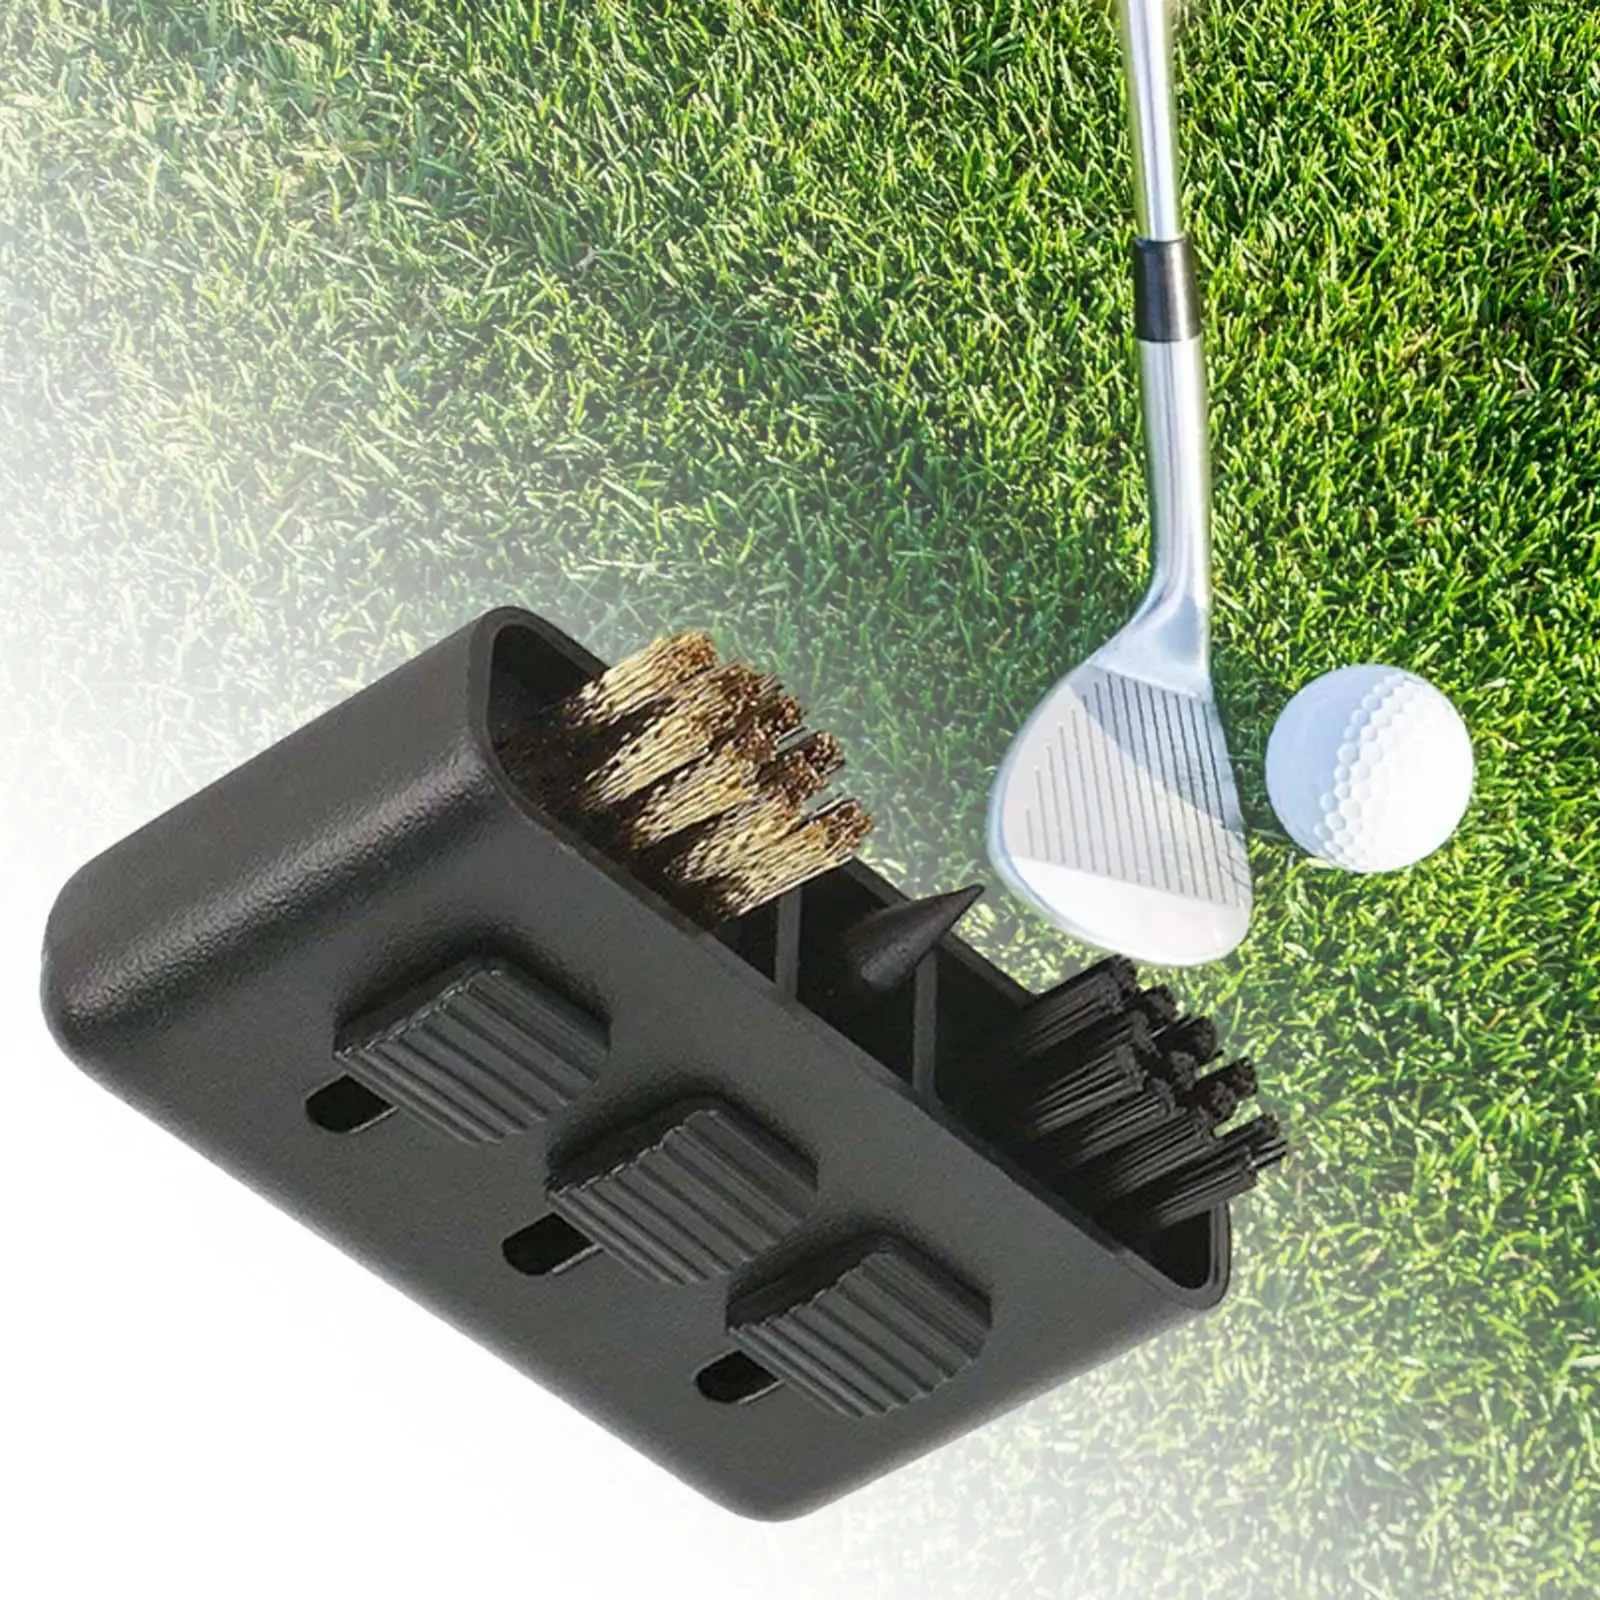 3 in 1 Golf Club Brush Retractable Restorer Cleaning Tool Golf Training Aids with Clip Groove Cleaner Tool Portable for Golfer